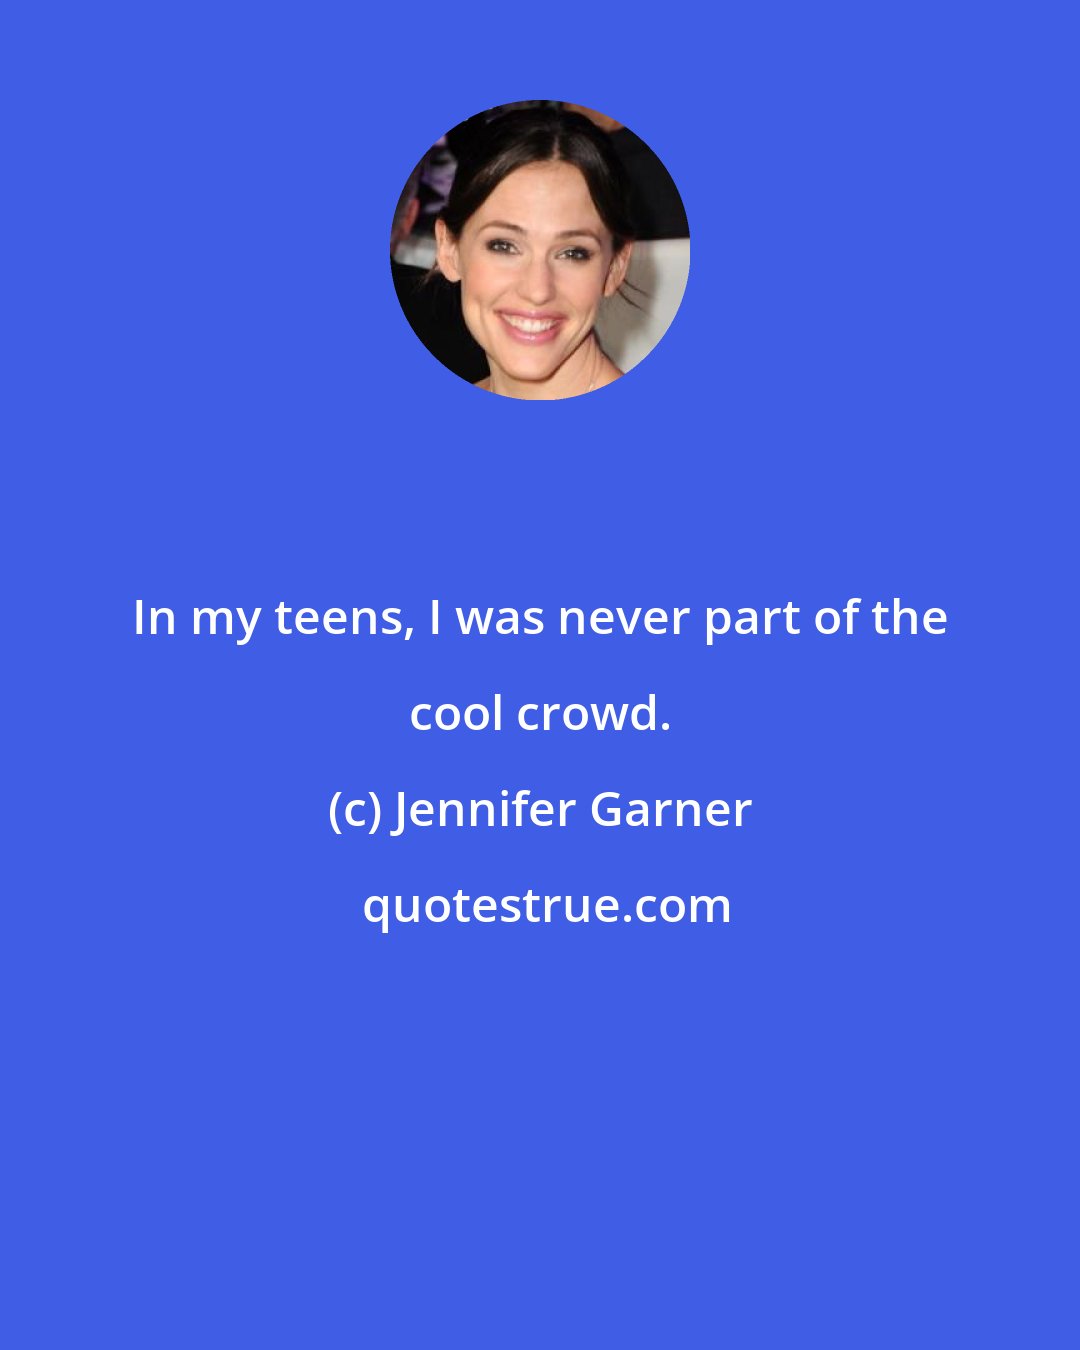 Jennifer Garner: In my teens, I was never part of the cool crowd.